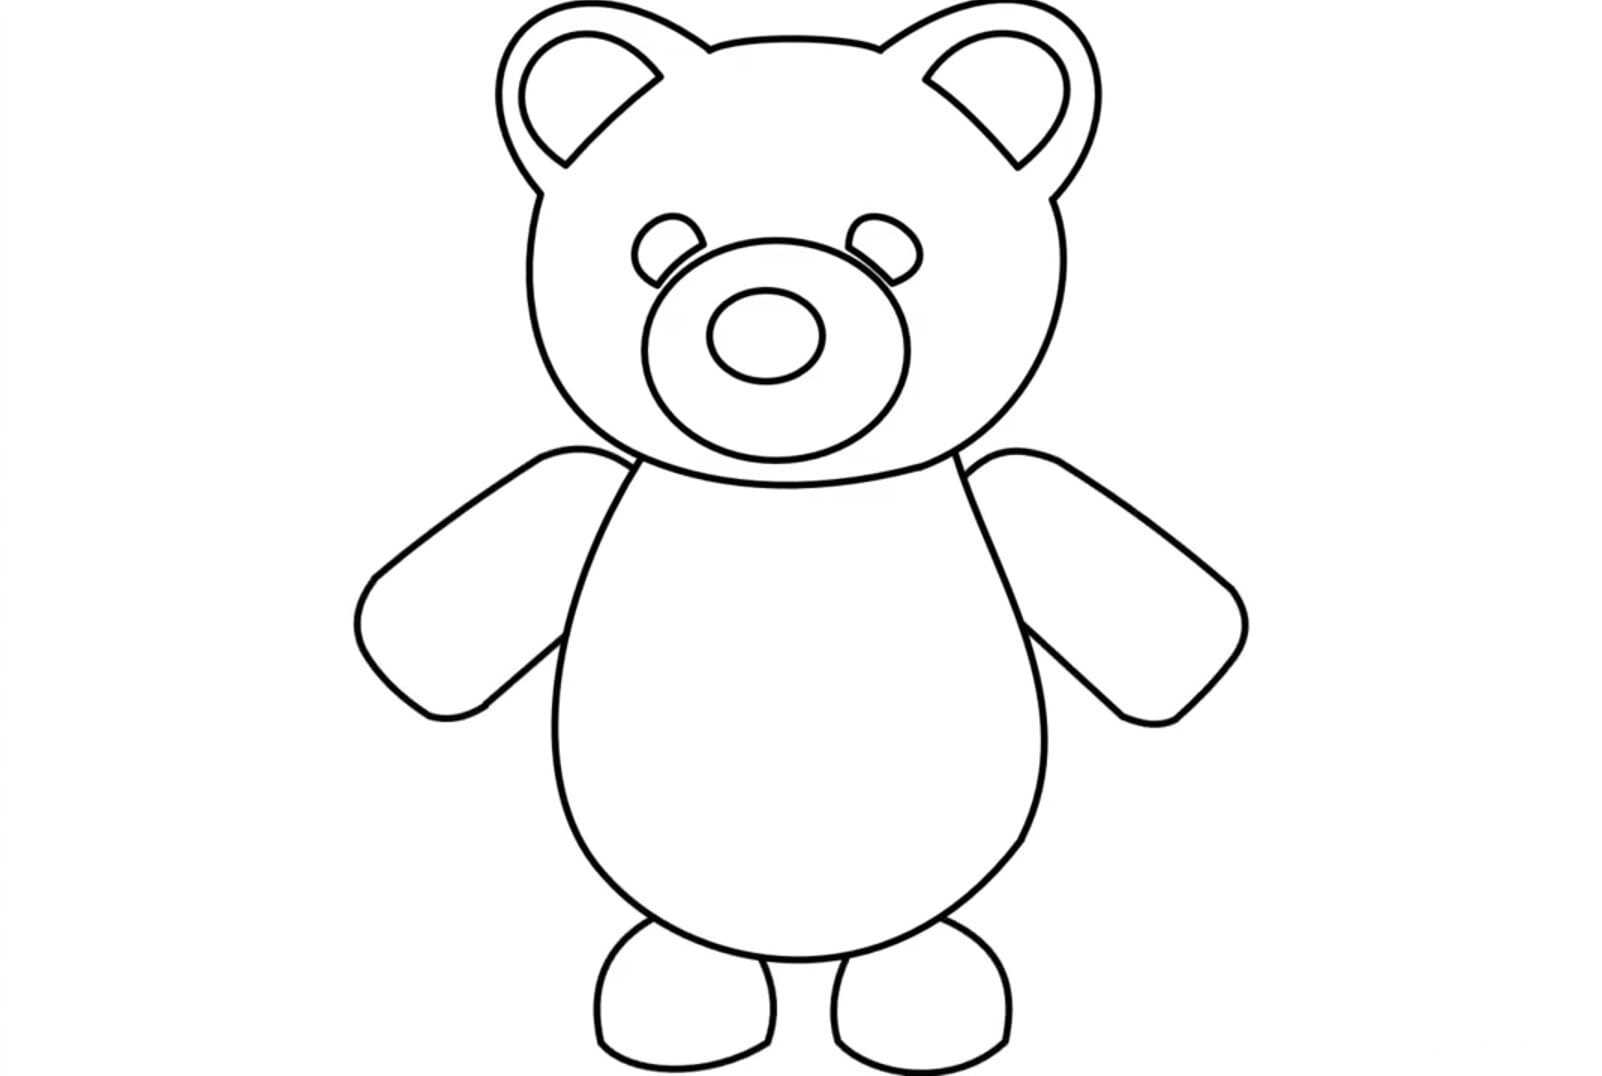 The Polar Bear From Adopt Me Could Be Obtained From The Christmas Egg Coloring Pages Adopt Me Coloring Pages Coloring Pages For Kids And Adults - roblox adopt me christmas egg